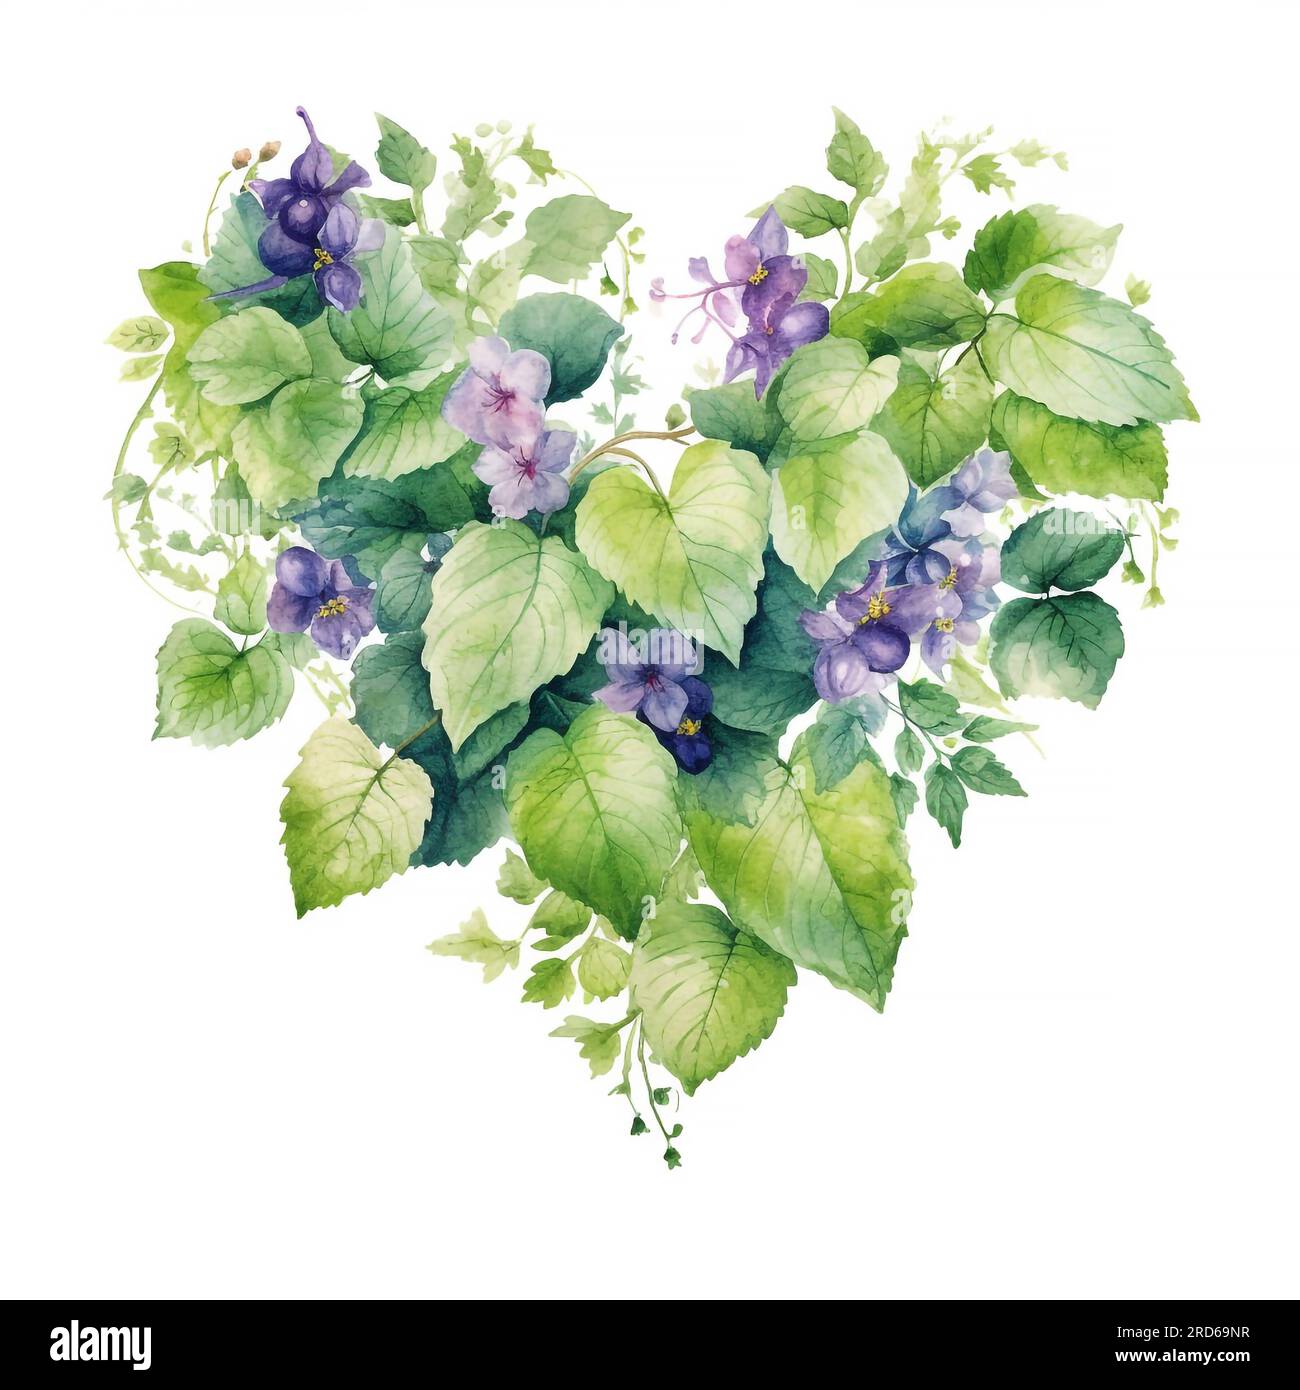 Patchouli or Pogostemon cablini essential heart background. Hand drawn watercolor illustration isolated on white background Stock Photo